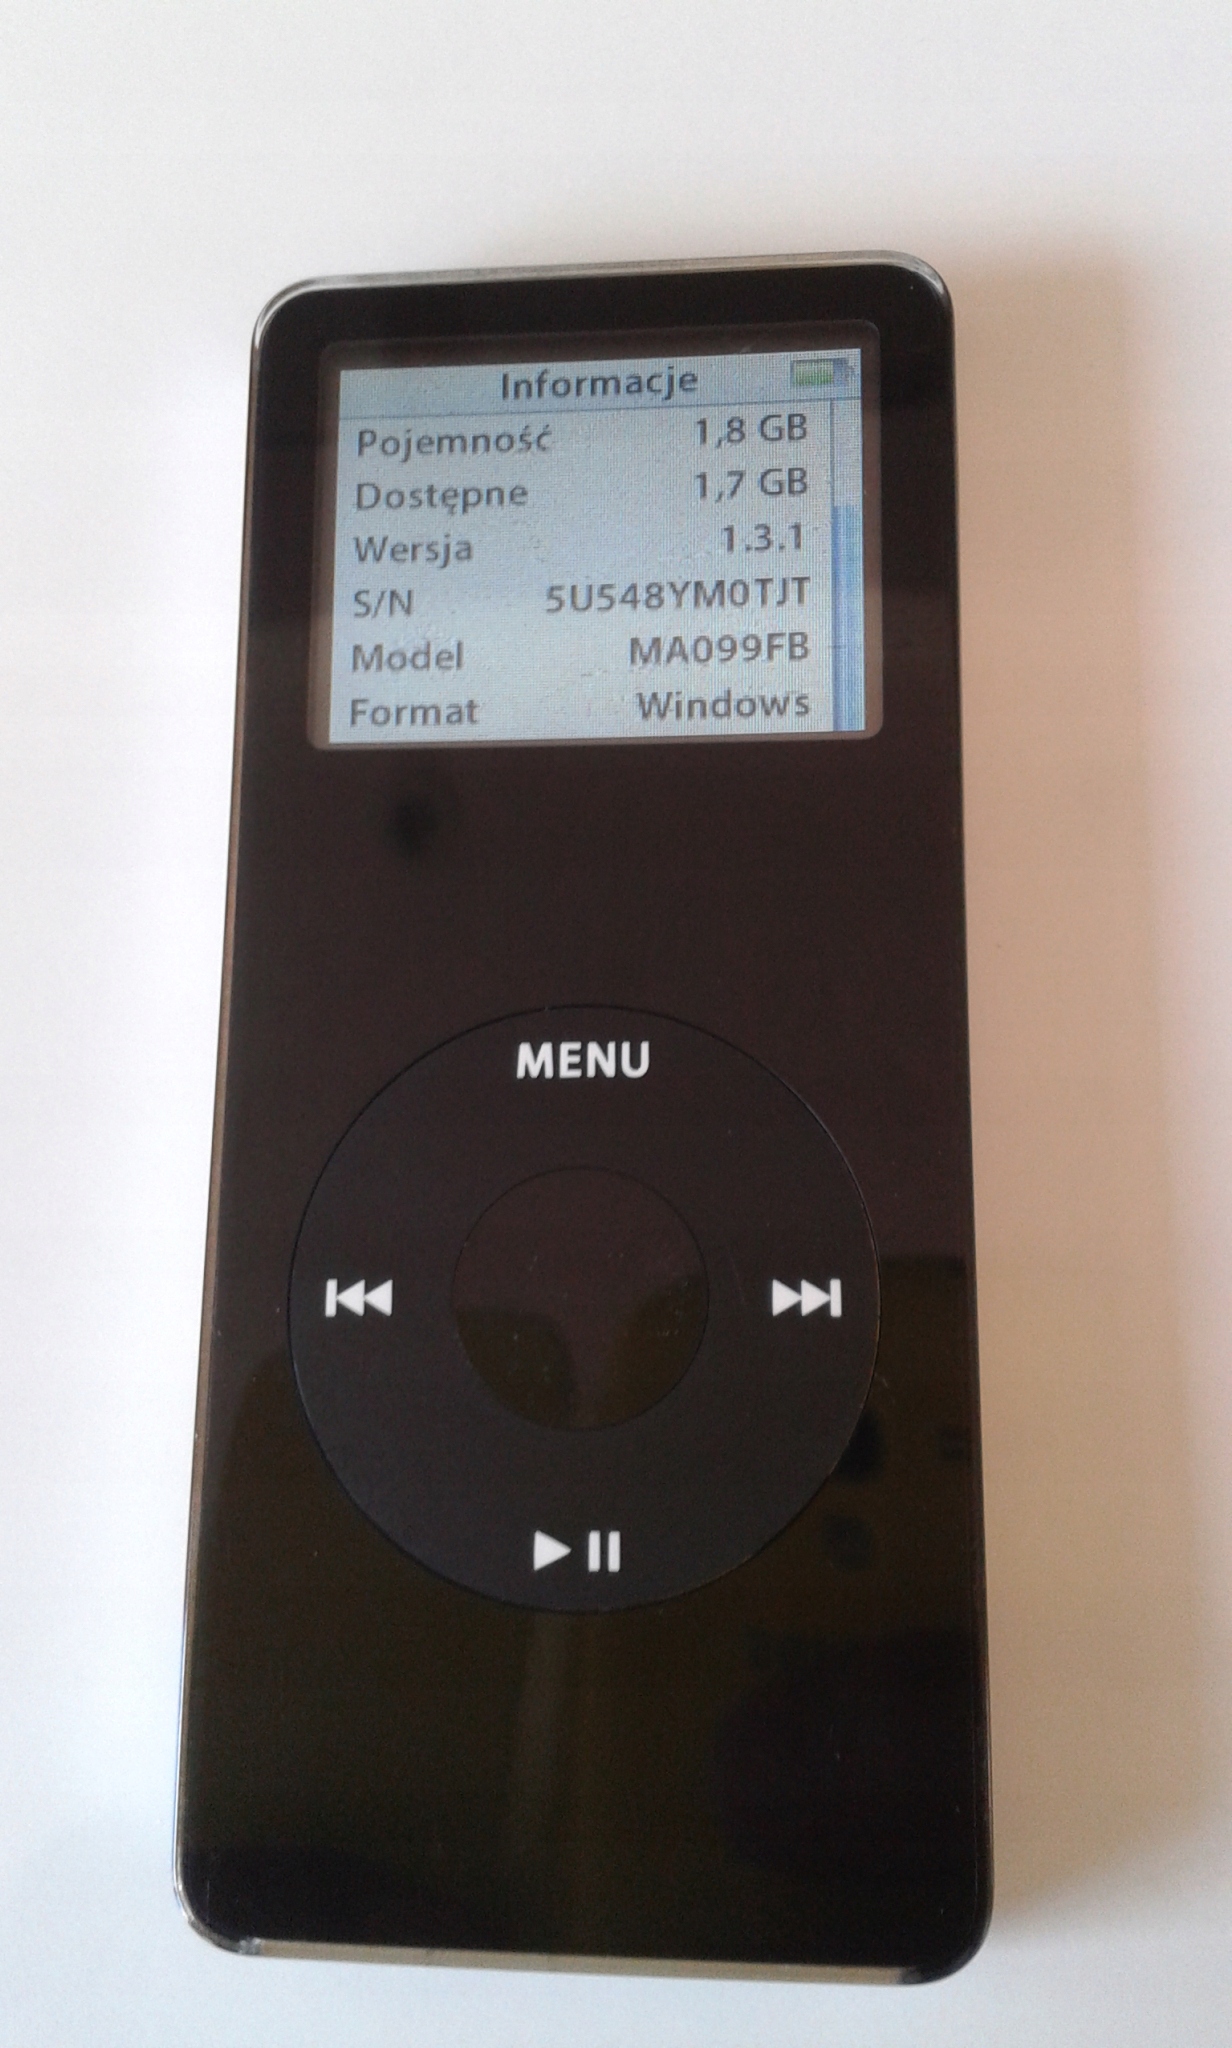 apple ipod a1137 software free download